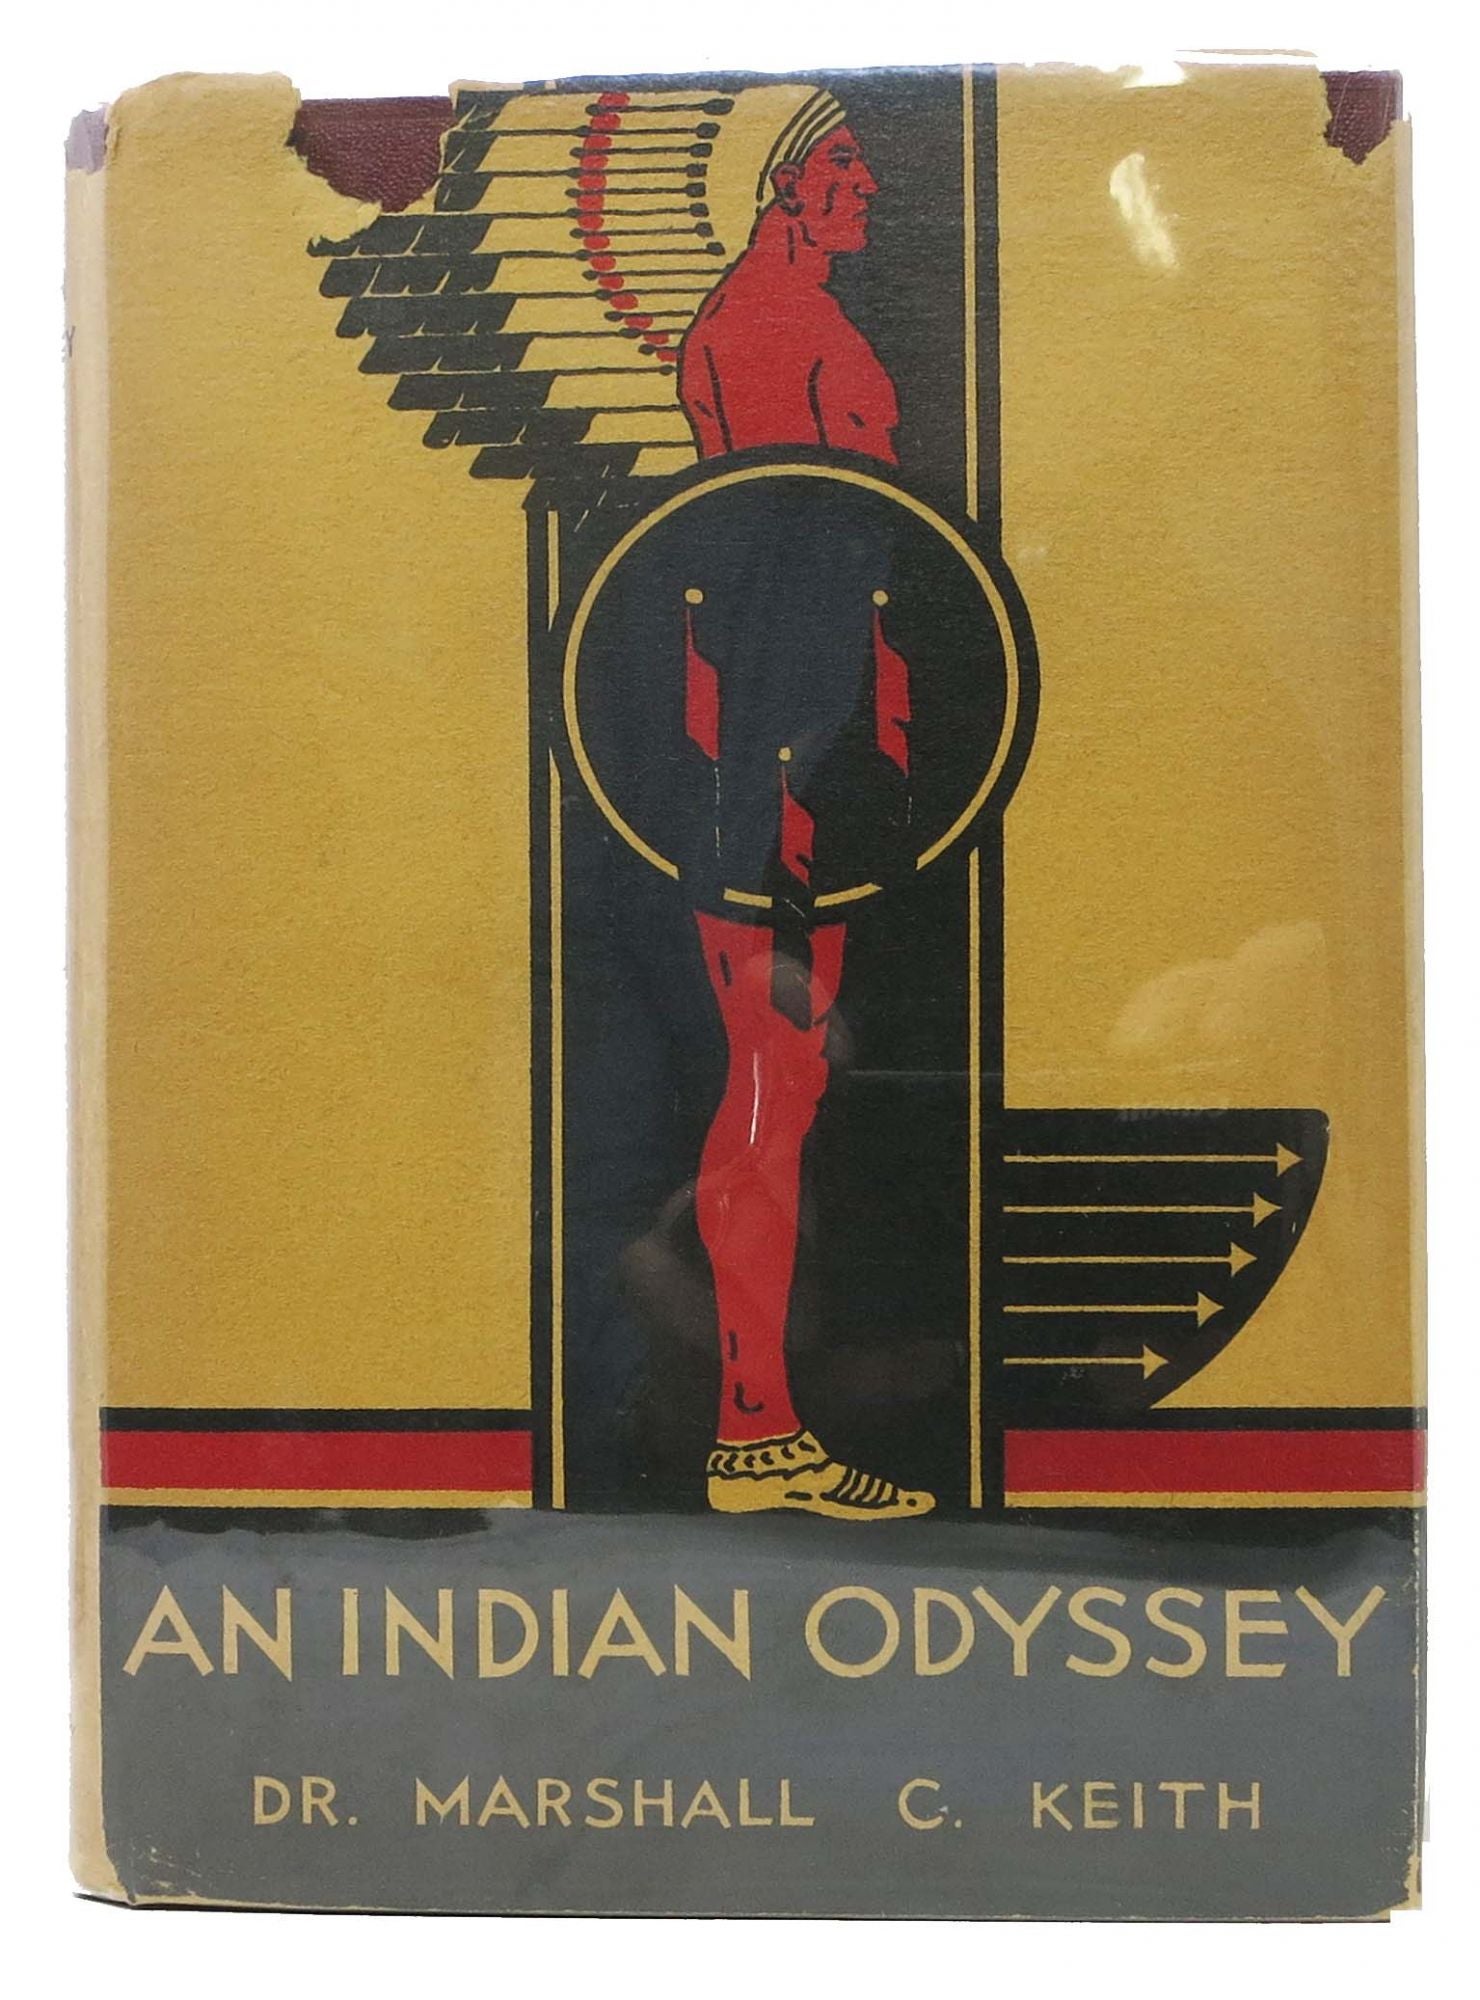 Keith, Marshall C. Dr. - An INDIAN ODYSSEY. The Story of Chief Washakie, The Upright Aborigine